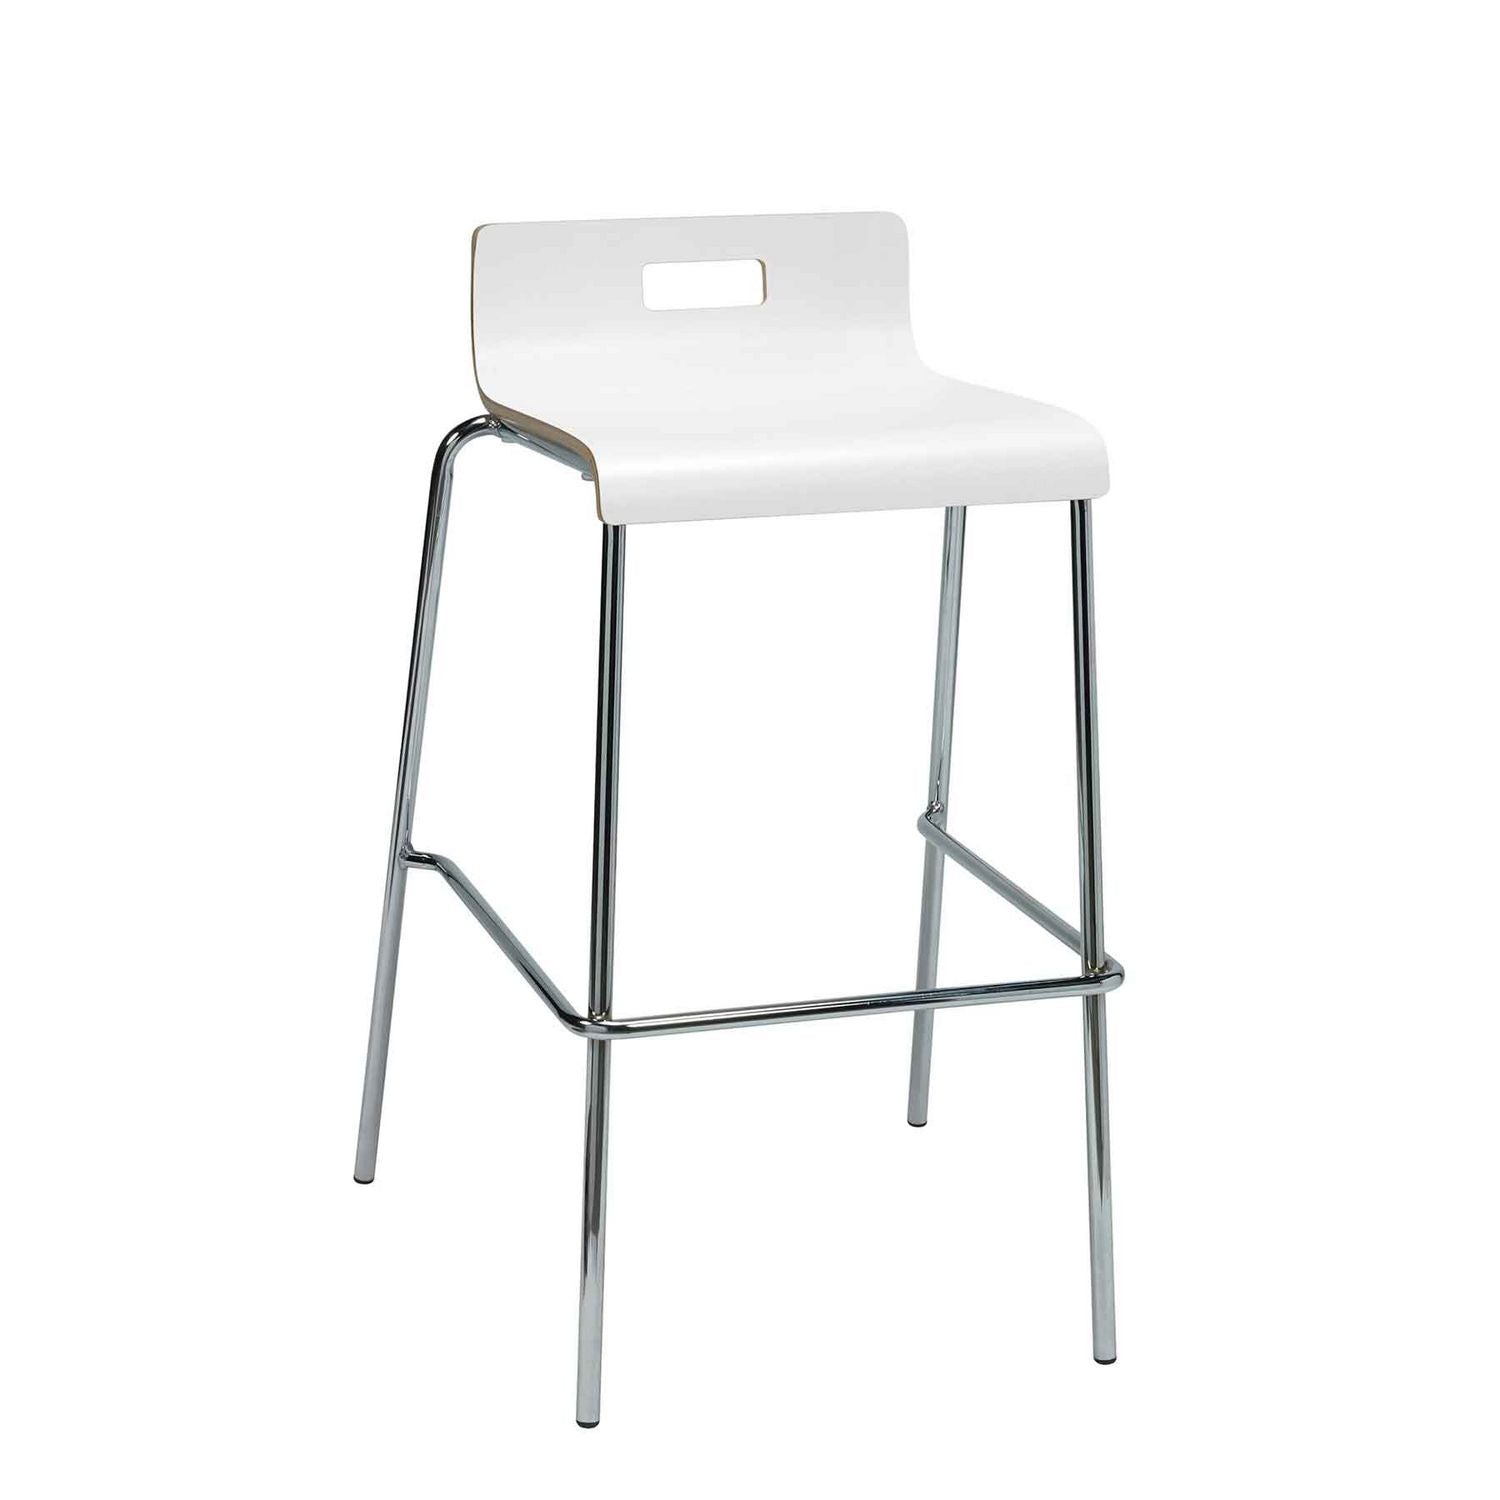 pedestal-bistro-table-with-four-white-jive-series-barstools-square-36-x-36-x-41-designer-white-ships-in-4-6-business-days_kfi811774039918 - 3